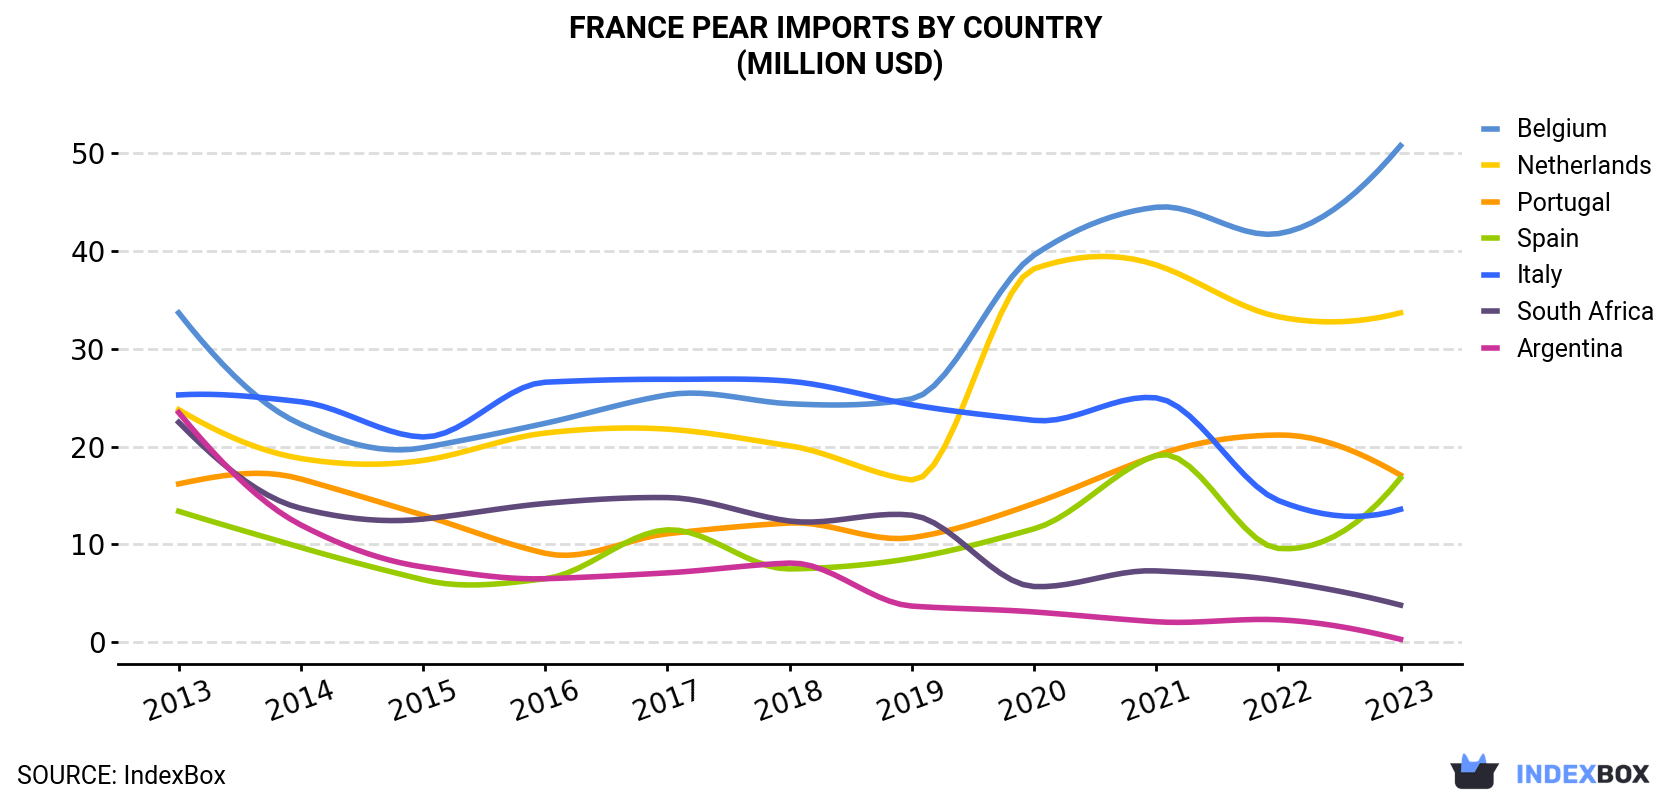 France Pear Imports By Country (Million USD)